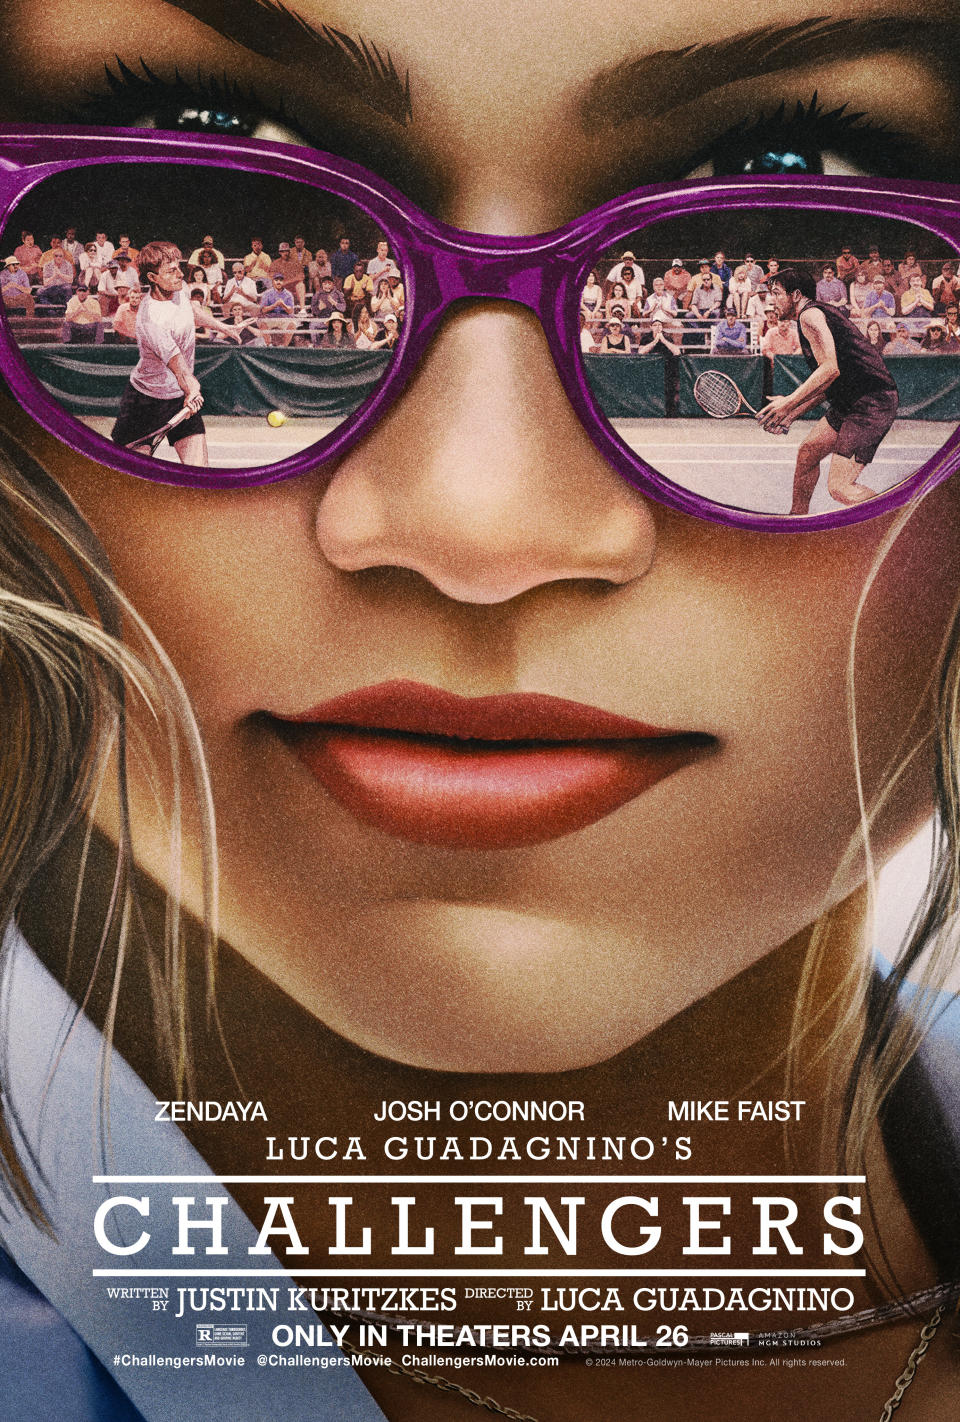 Movie poster for "Challengers" starring Zendaya, with close-up on sunglasses reflecting a tennis scene